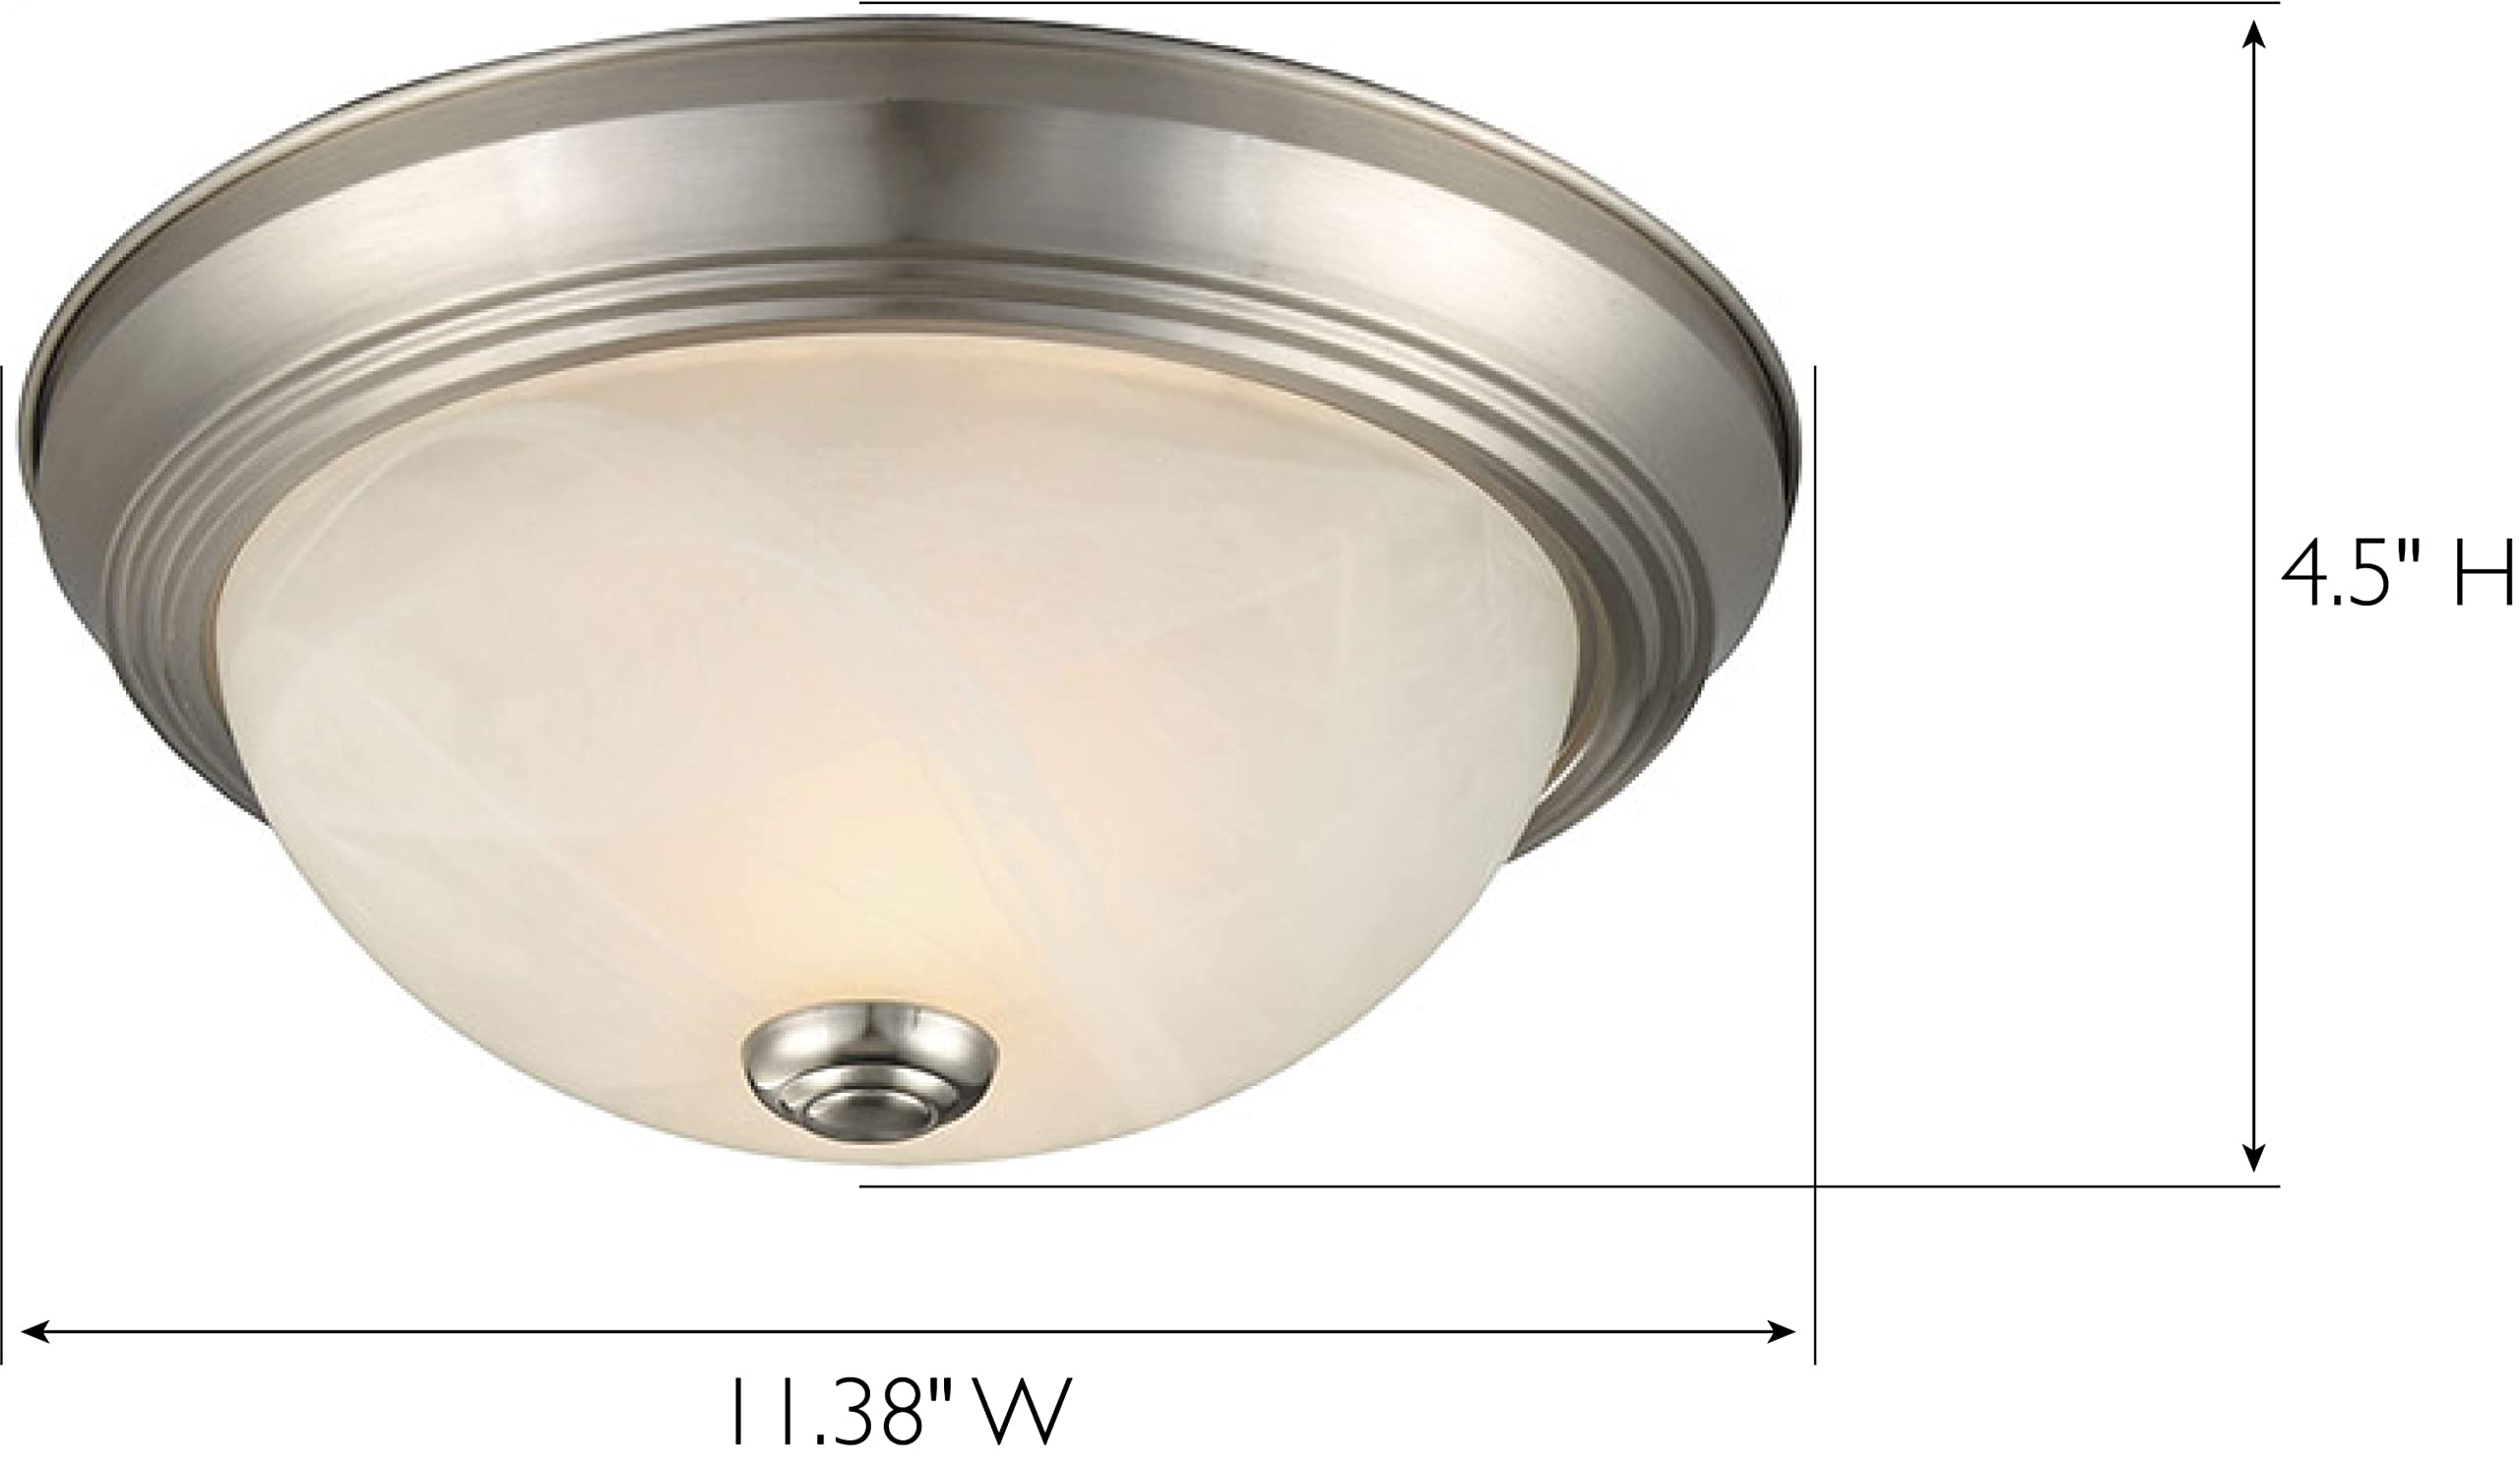 Design House 587527 Traditional 2-Light Indoor Dimmable Ceiling Light with Alabaster Glass for Bedroom Hallway Kitchen Dining Room, Satin Nickel 11-Inch, 2 Count (Pack of 1)